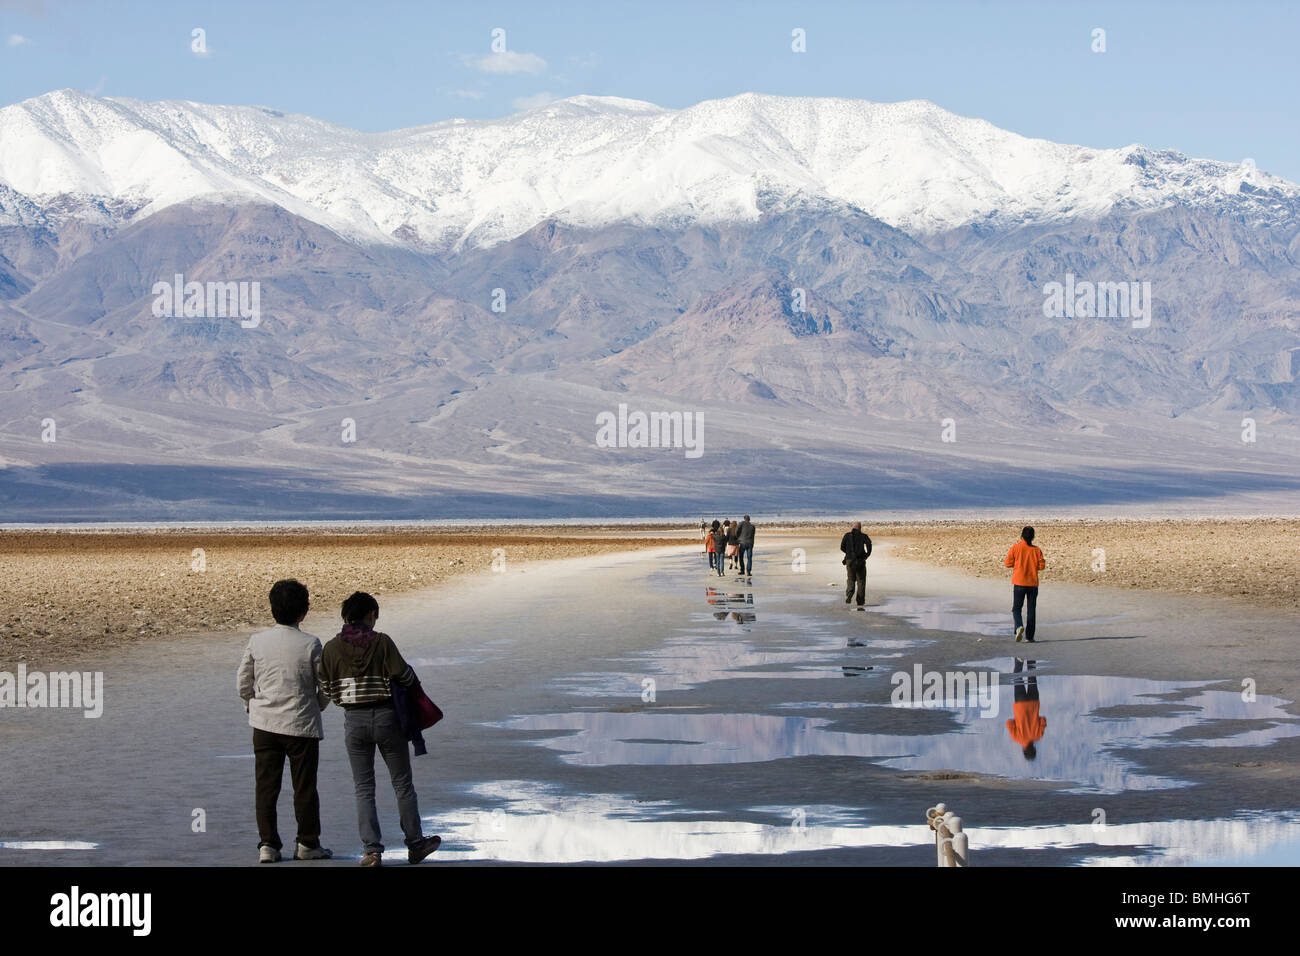 Tourists walking on Badwater Basin. Lowest point in the United States. Death Valley National Park, California. Stock Photo